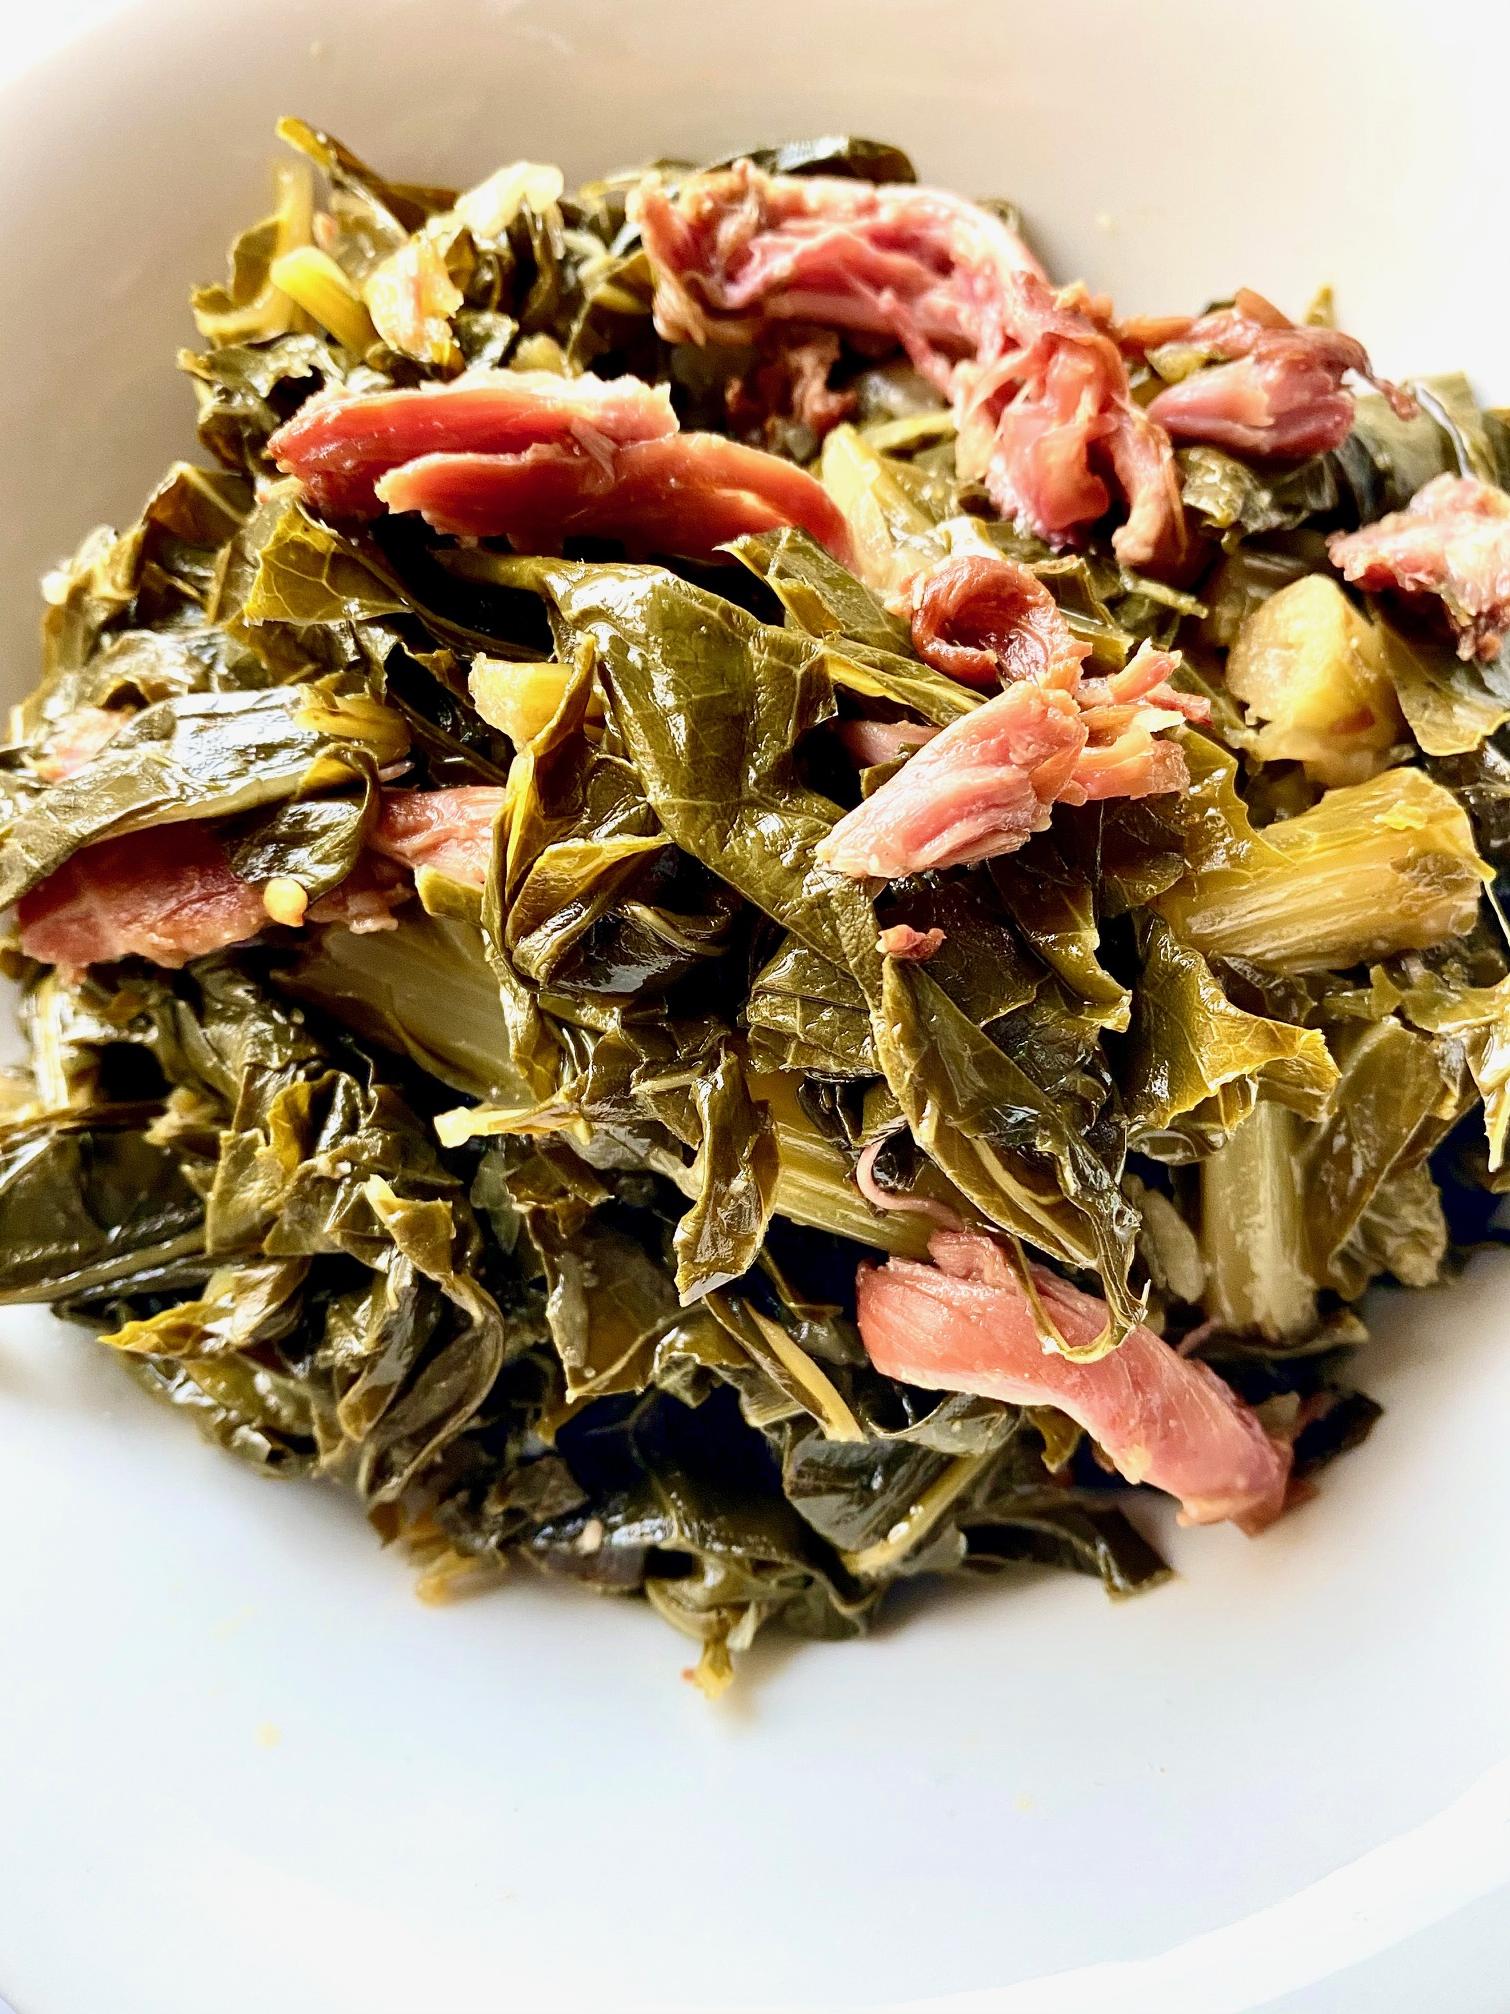  A little bit of bacon and vinegar gives these collard greens a tangy, smoky kick